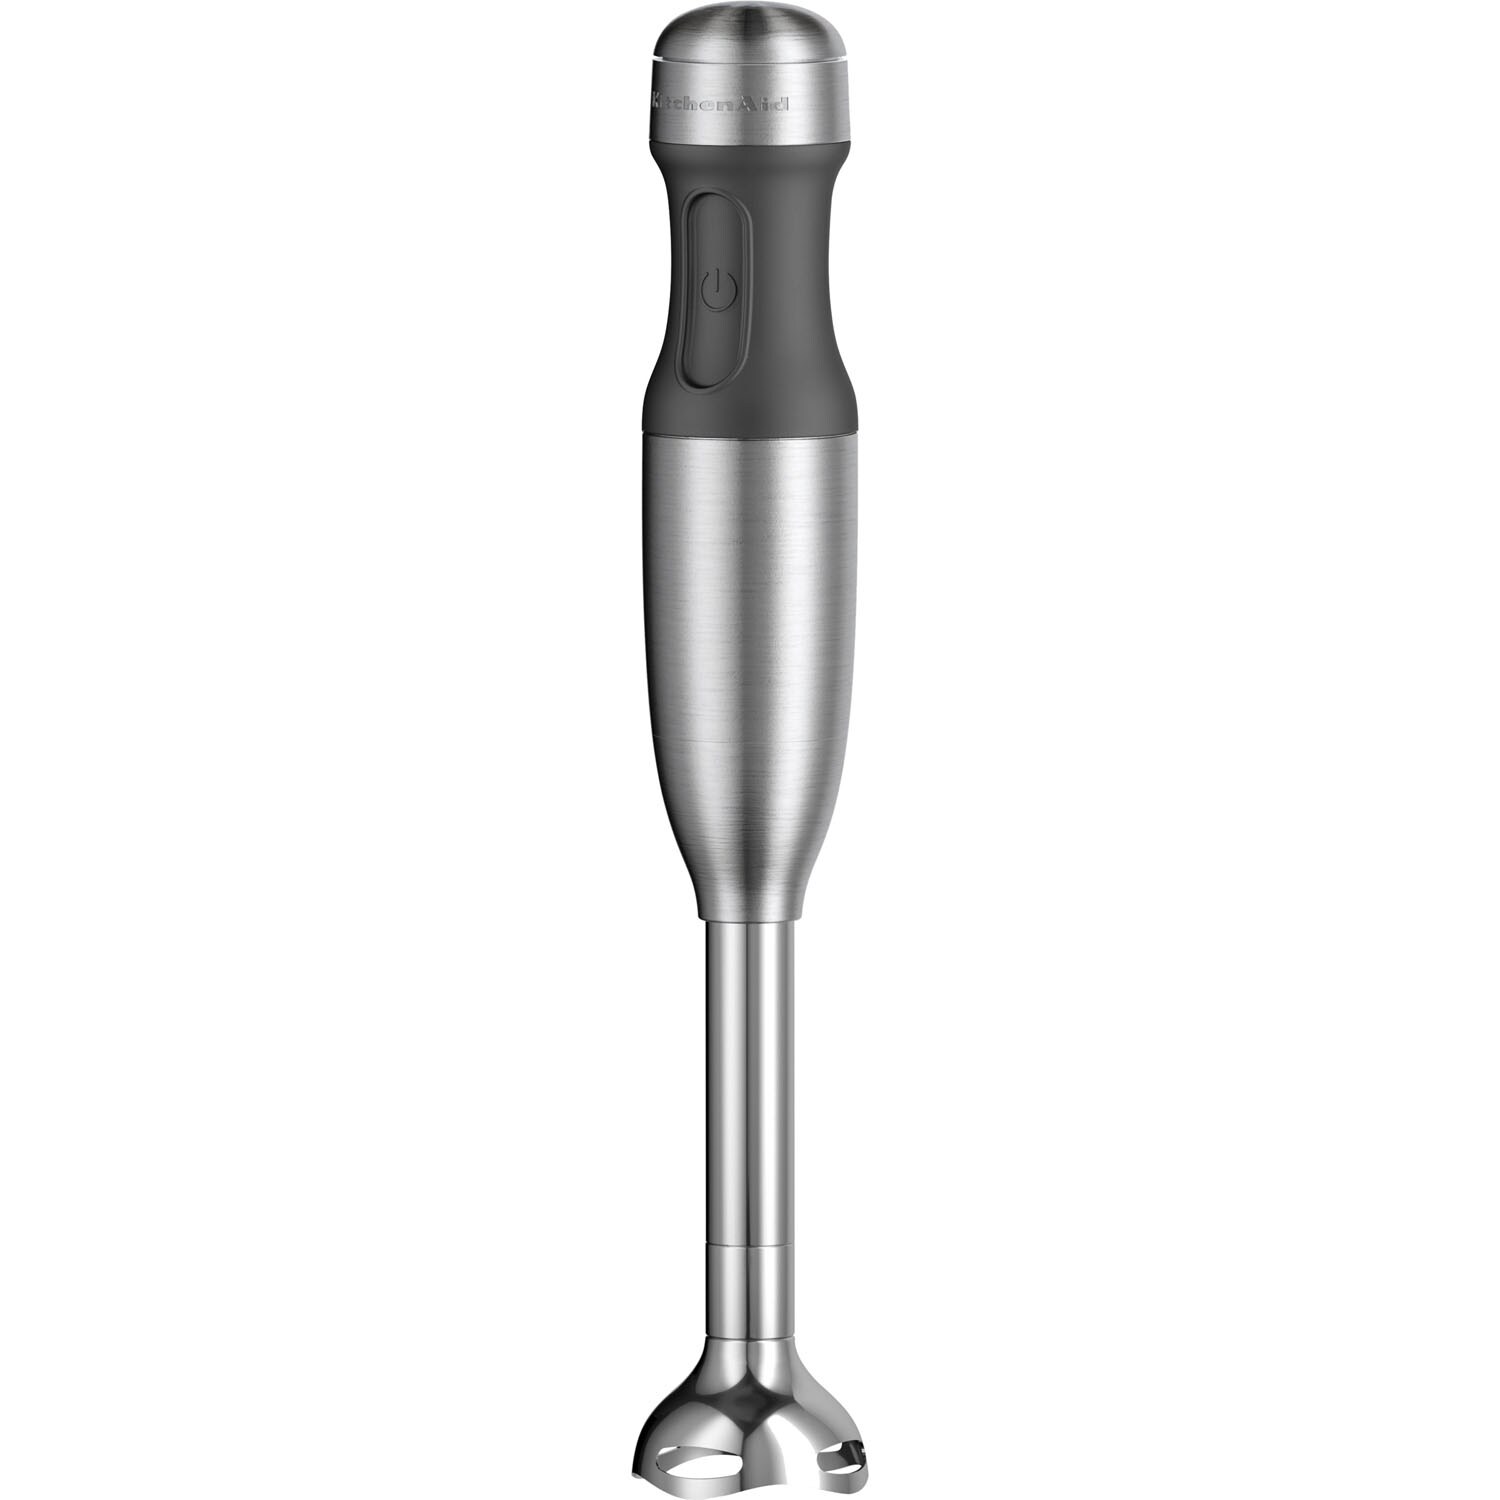 GE 2-Speed Stainless Steel Immersion Hand Blender with Whisk